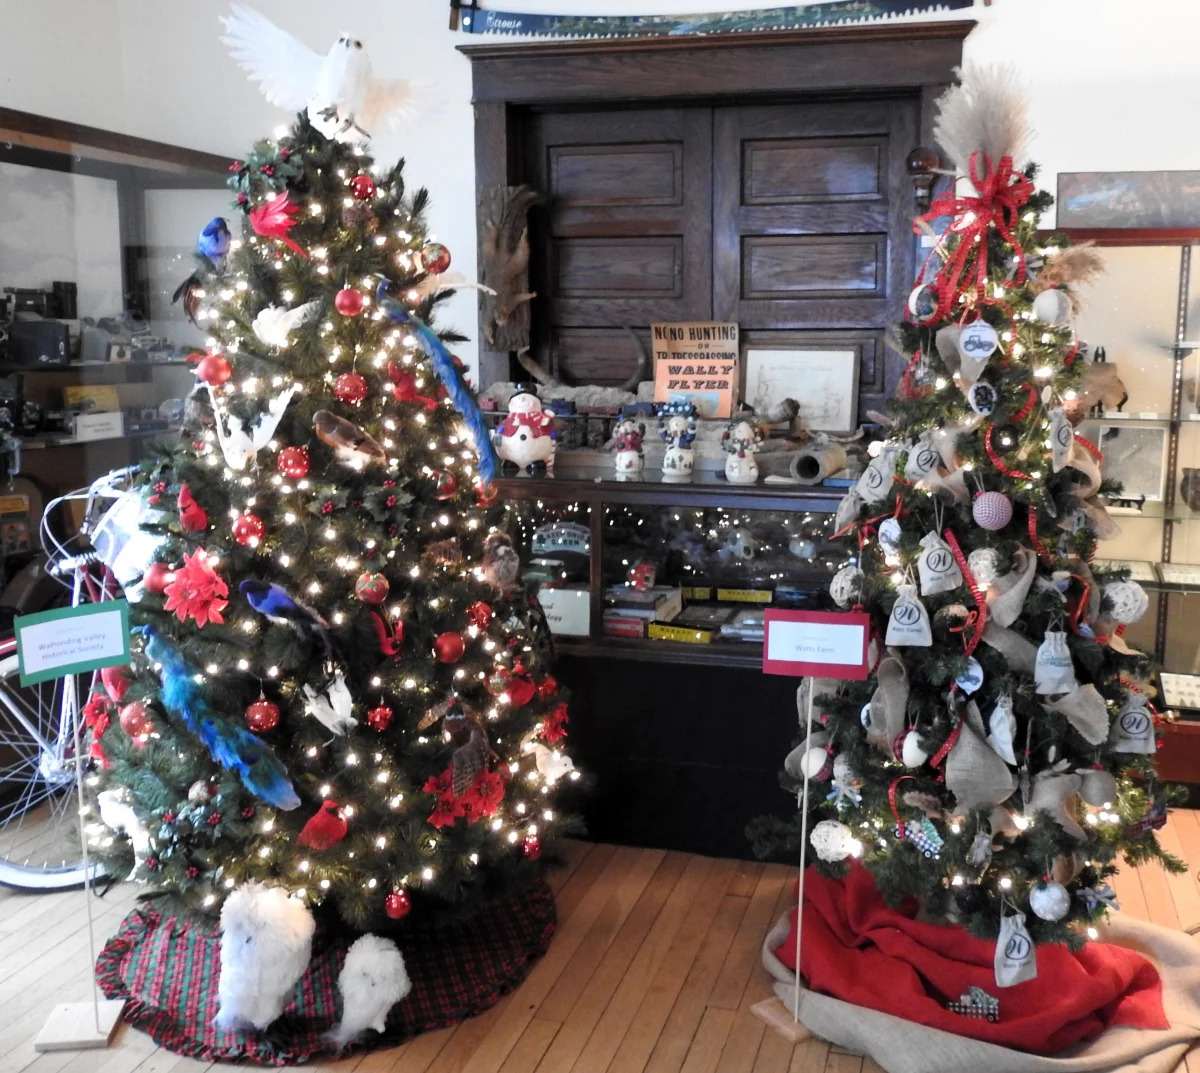 Christmas spirit is strong at Walhonding Valley Historical Society Museum